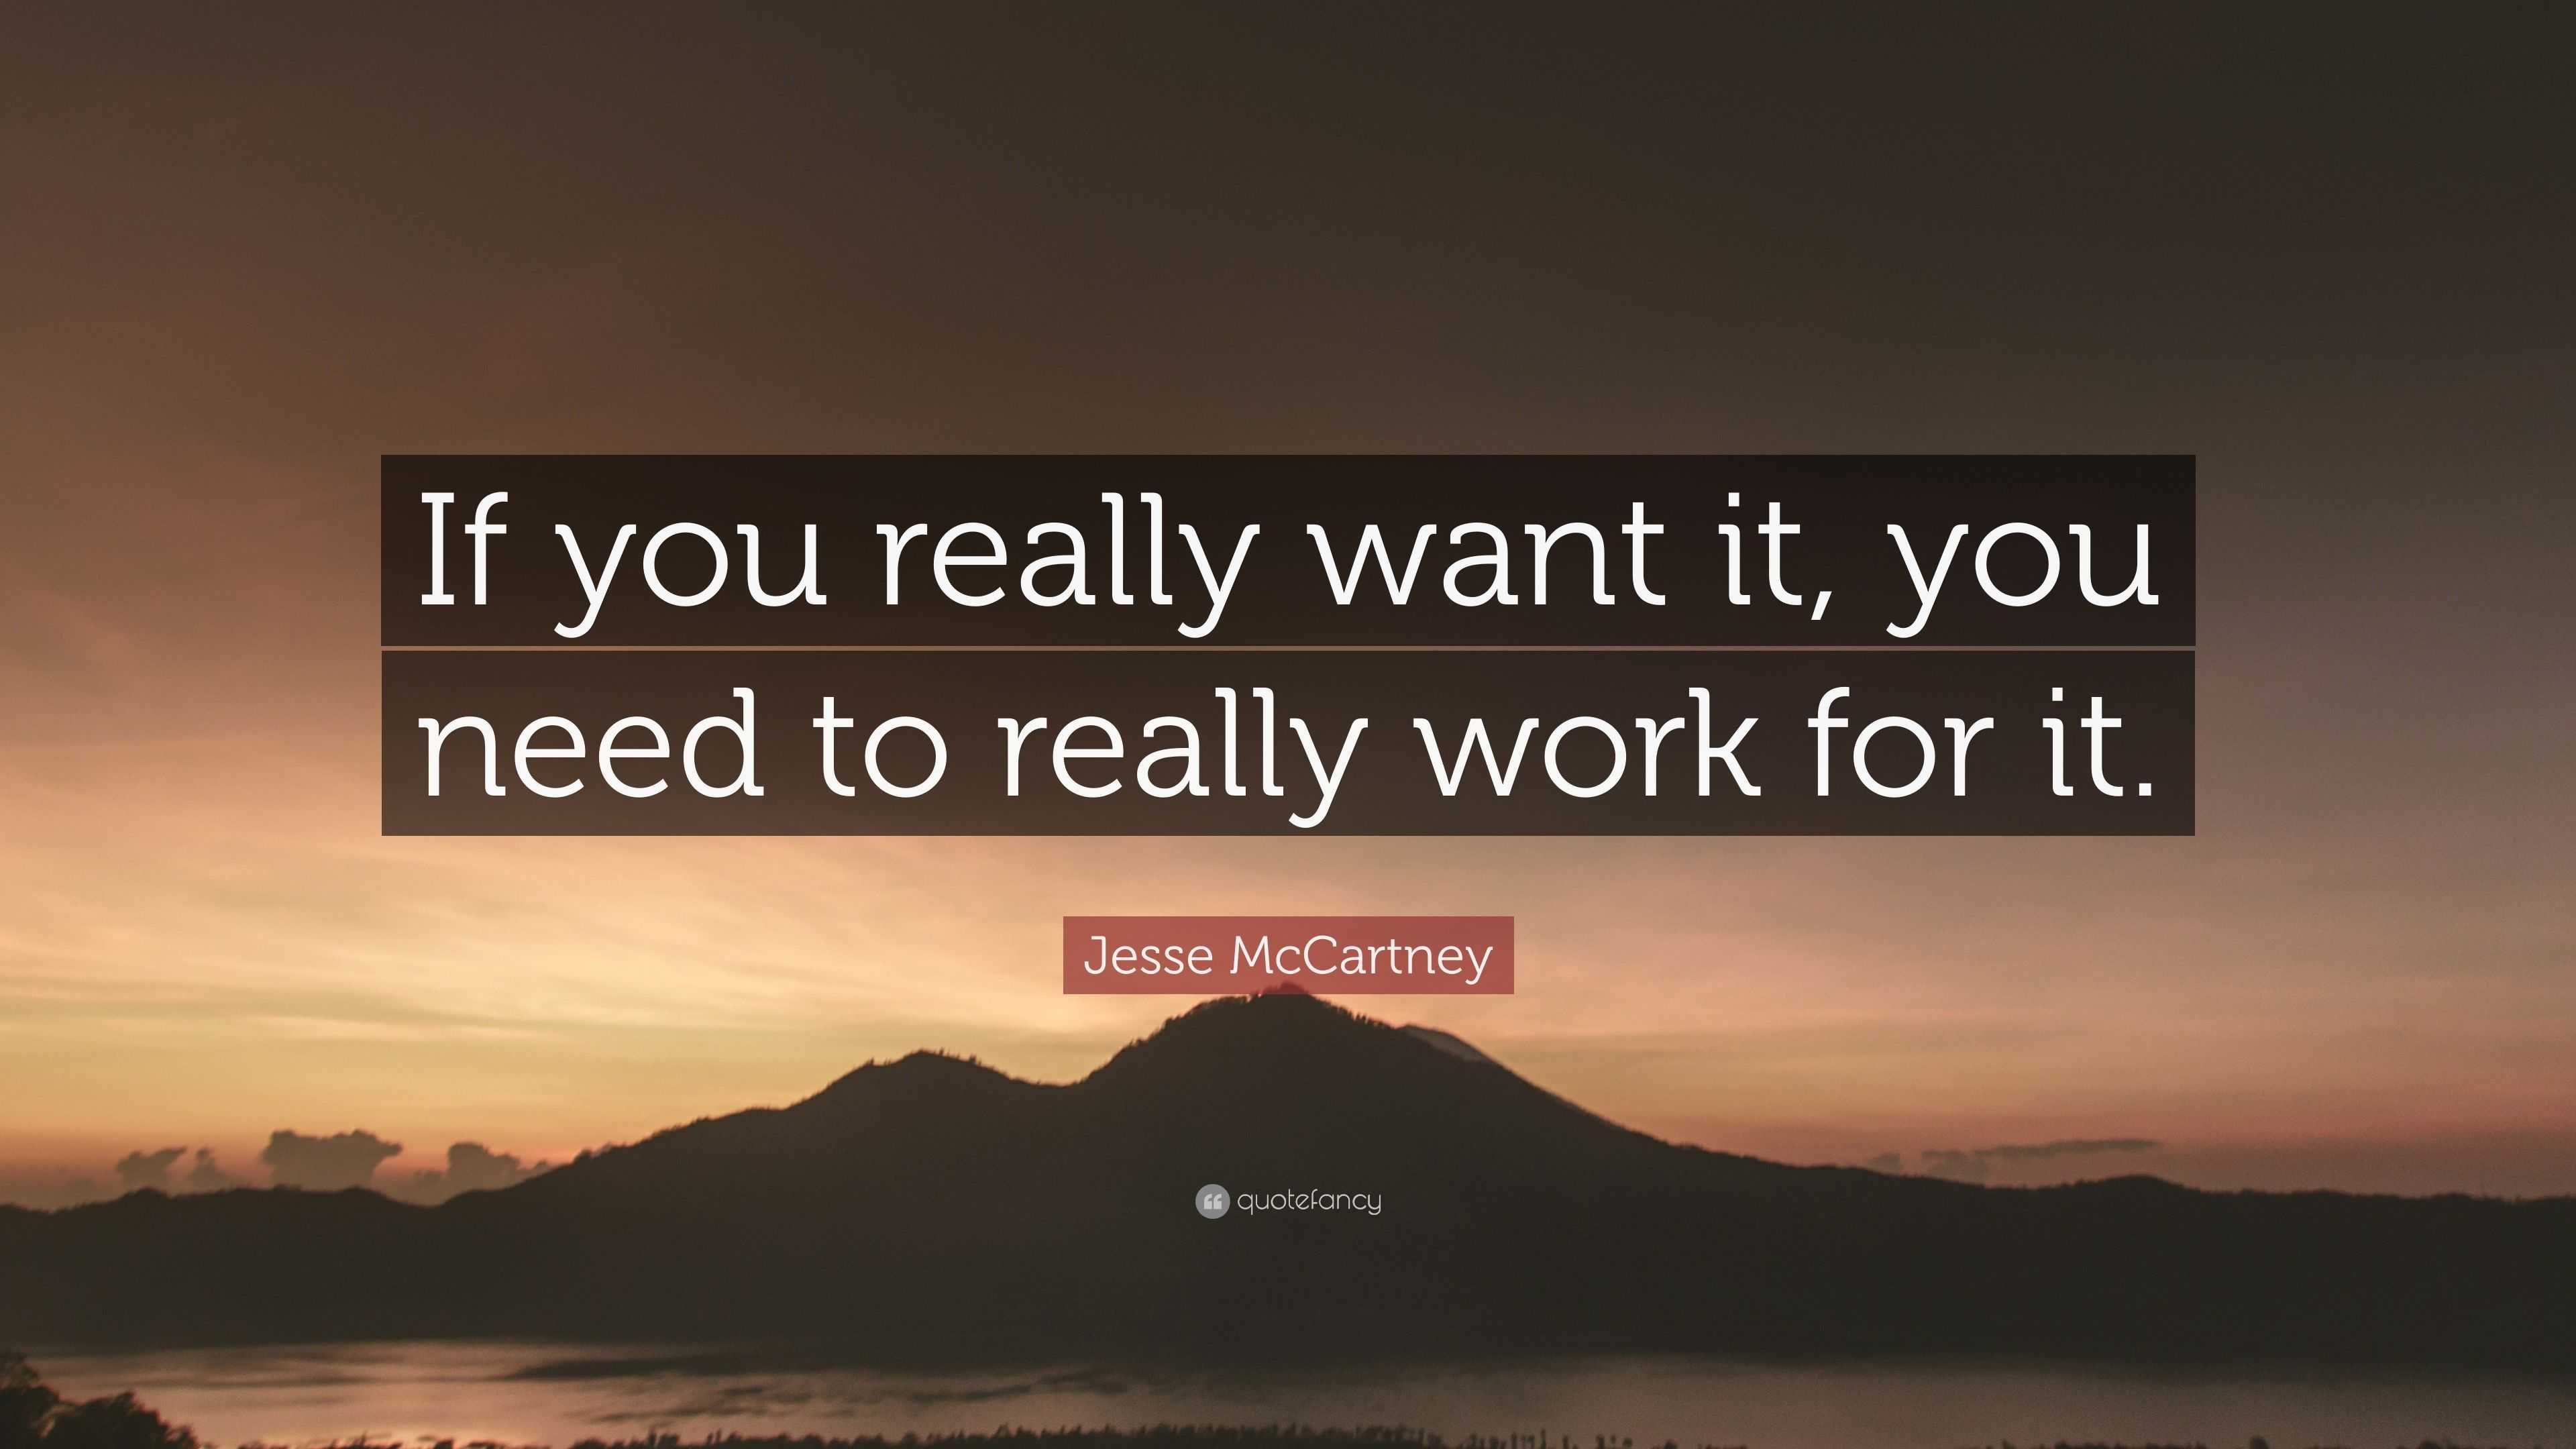 Jesse McCartney Quote: “If you really want it, you need to really work ...